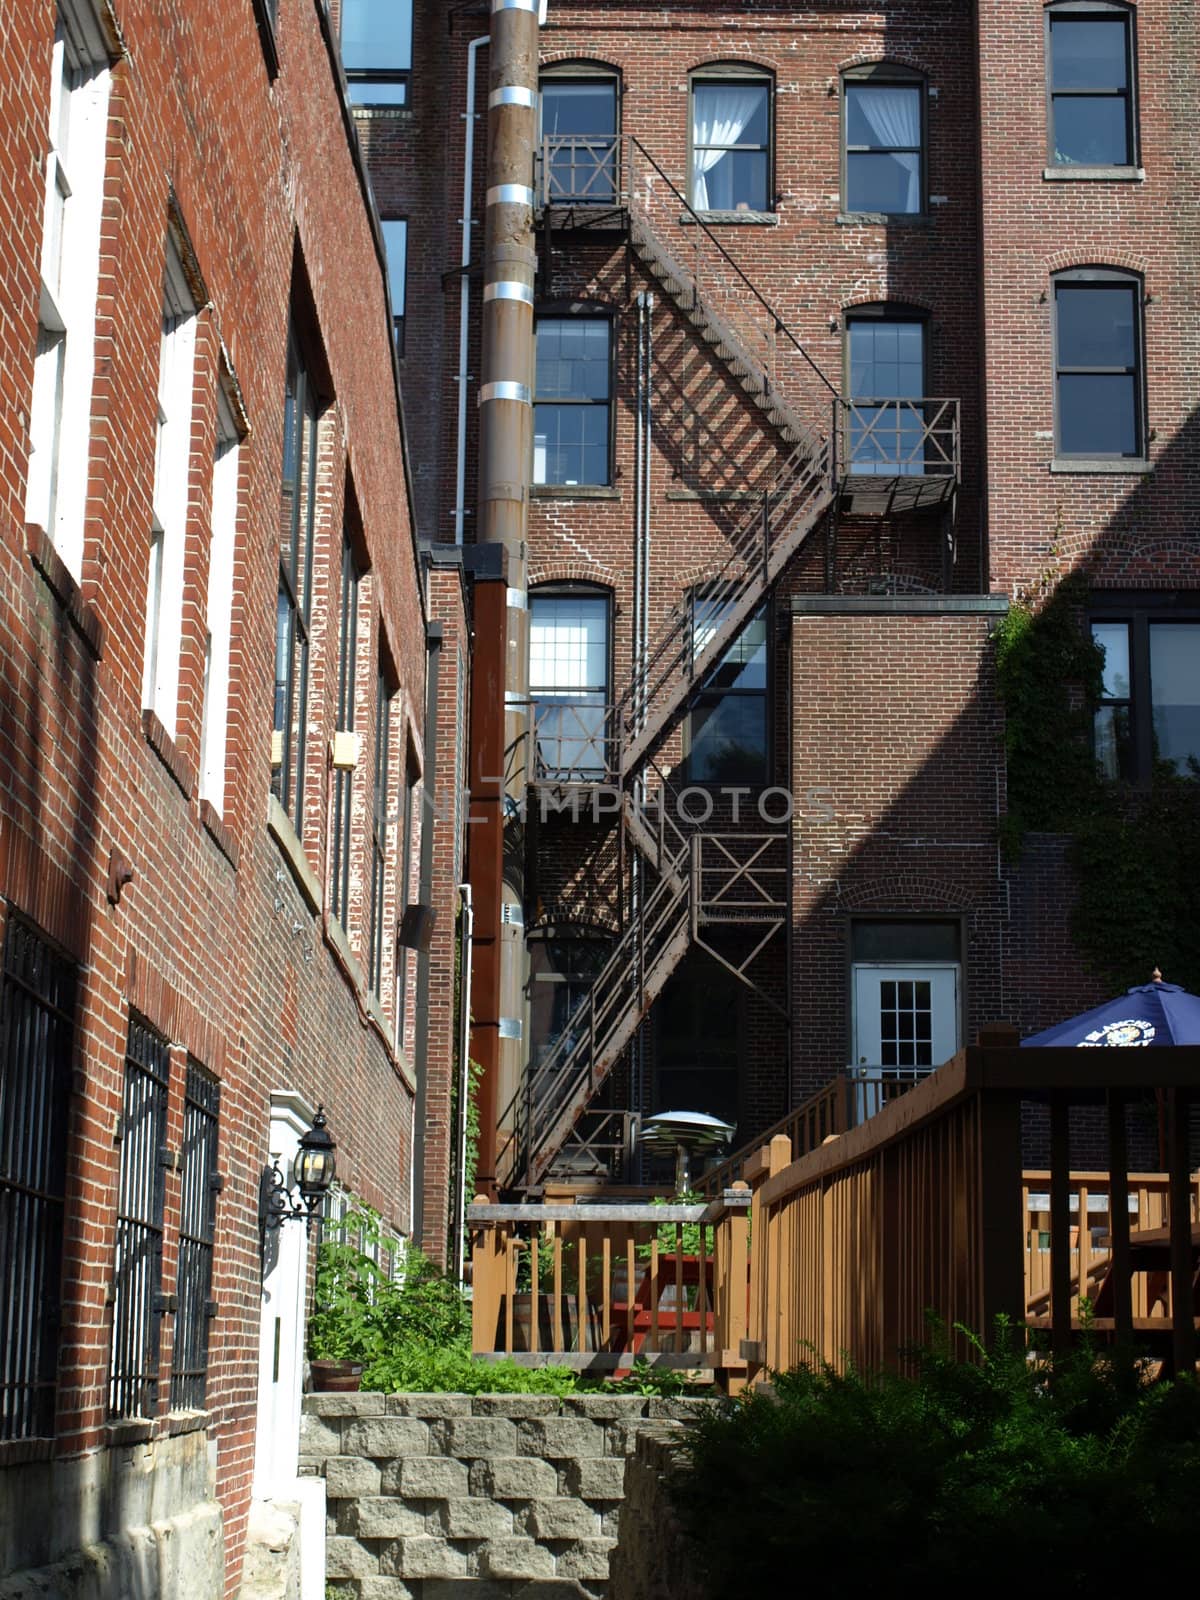 Back alley by northwoodsphoto